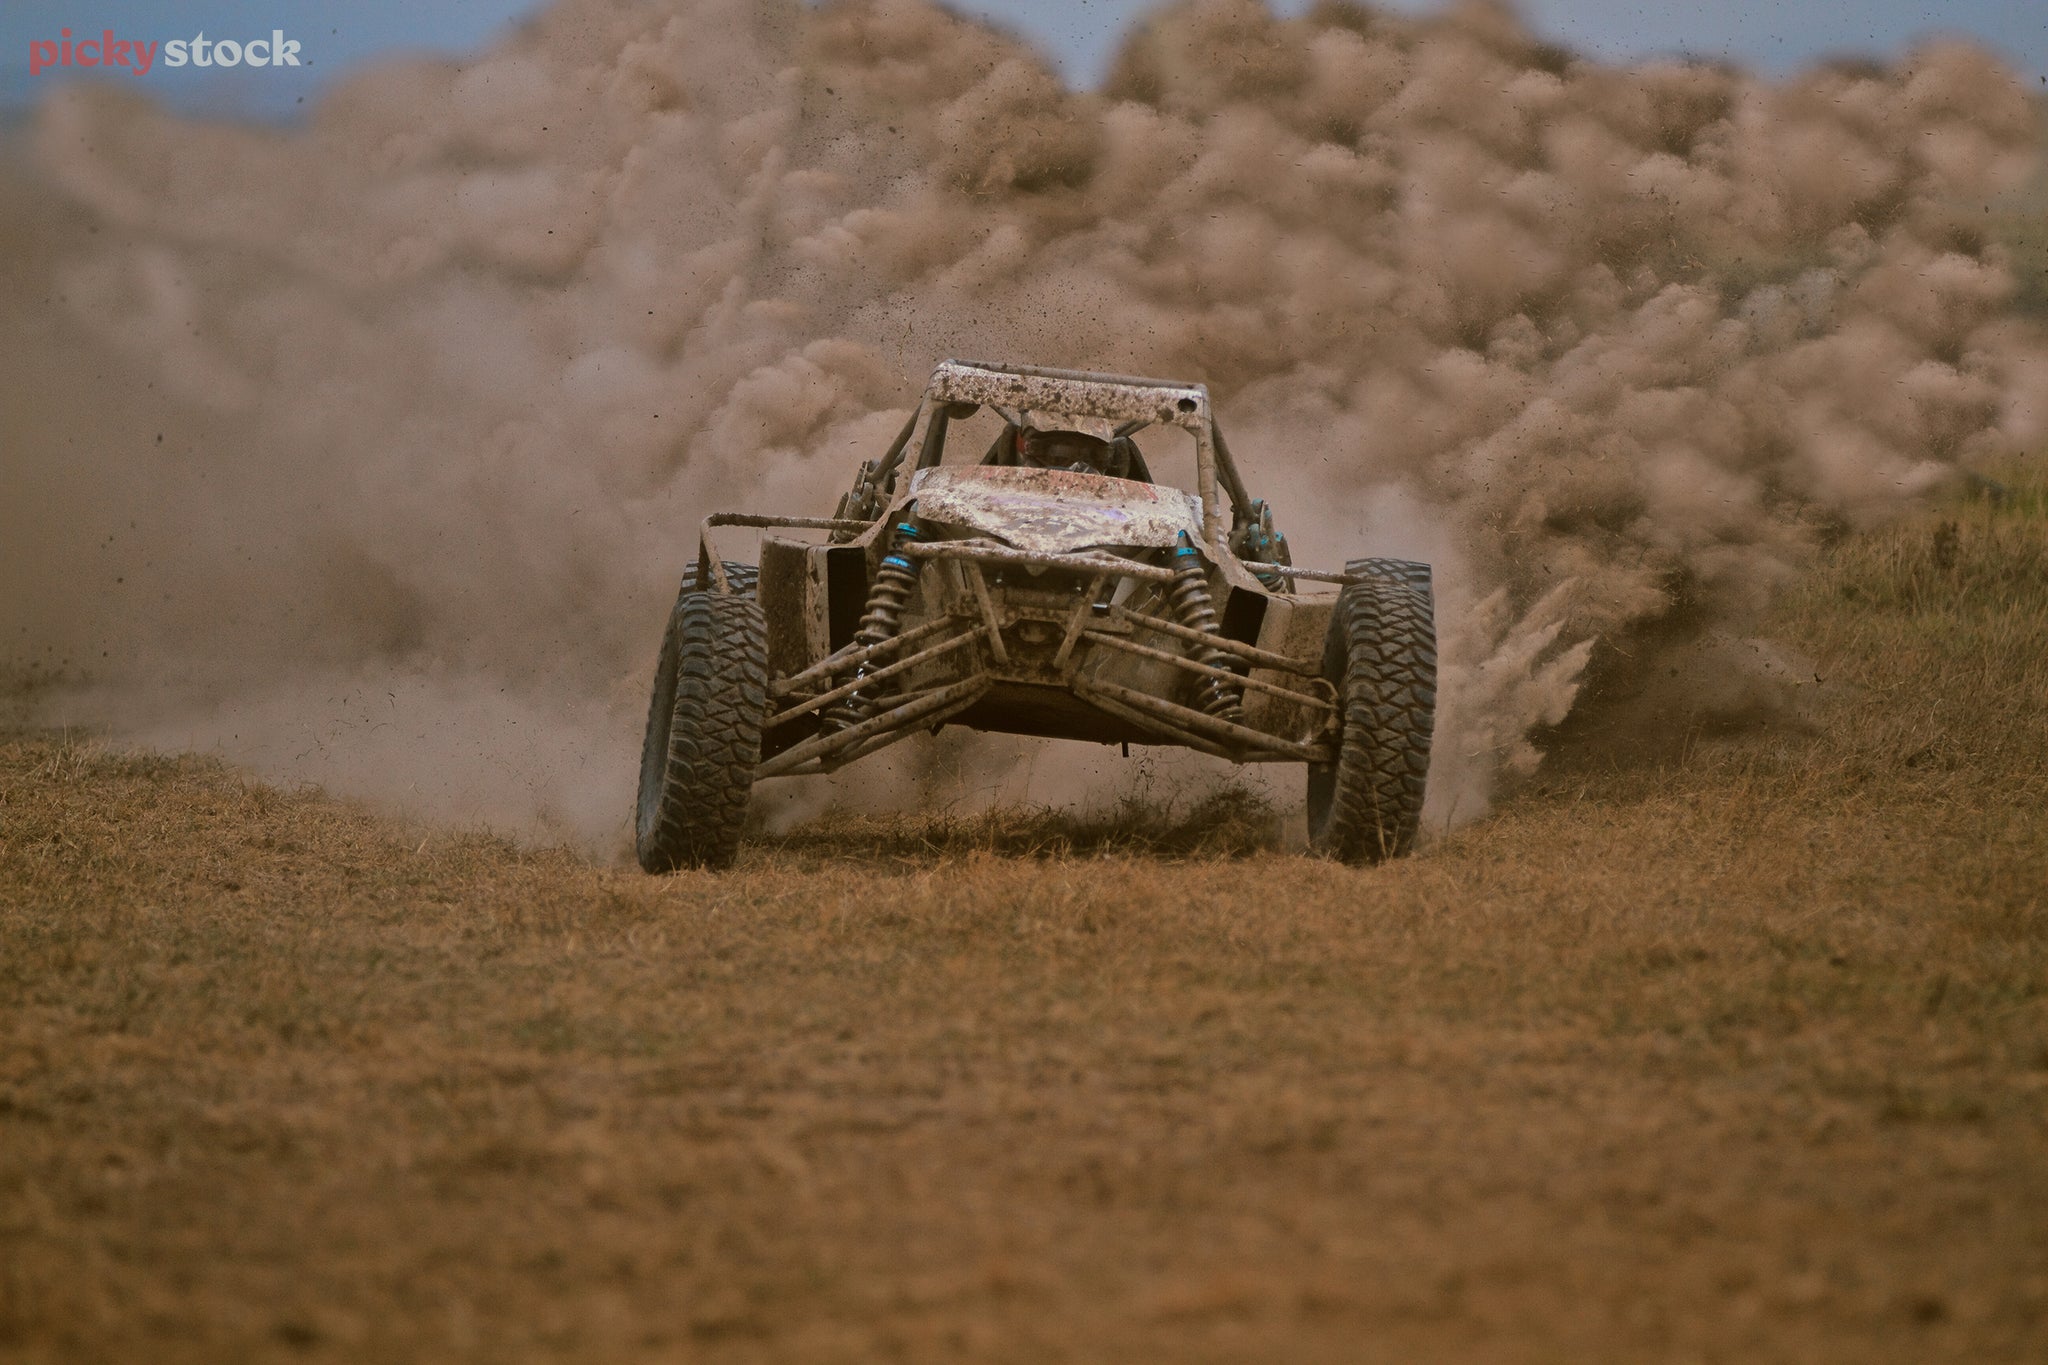 Landscape close-up of a motor sports car hurling towards the camera, caked in mud and producing large billowing plumes of dust.